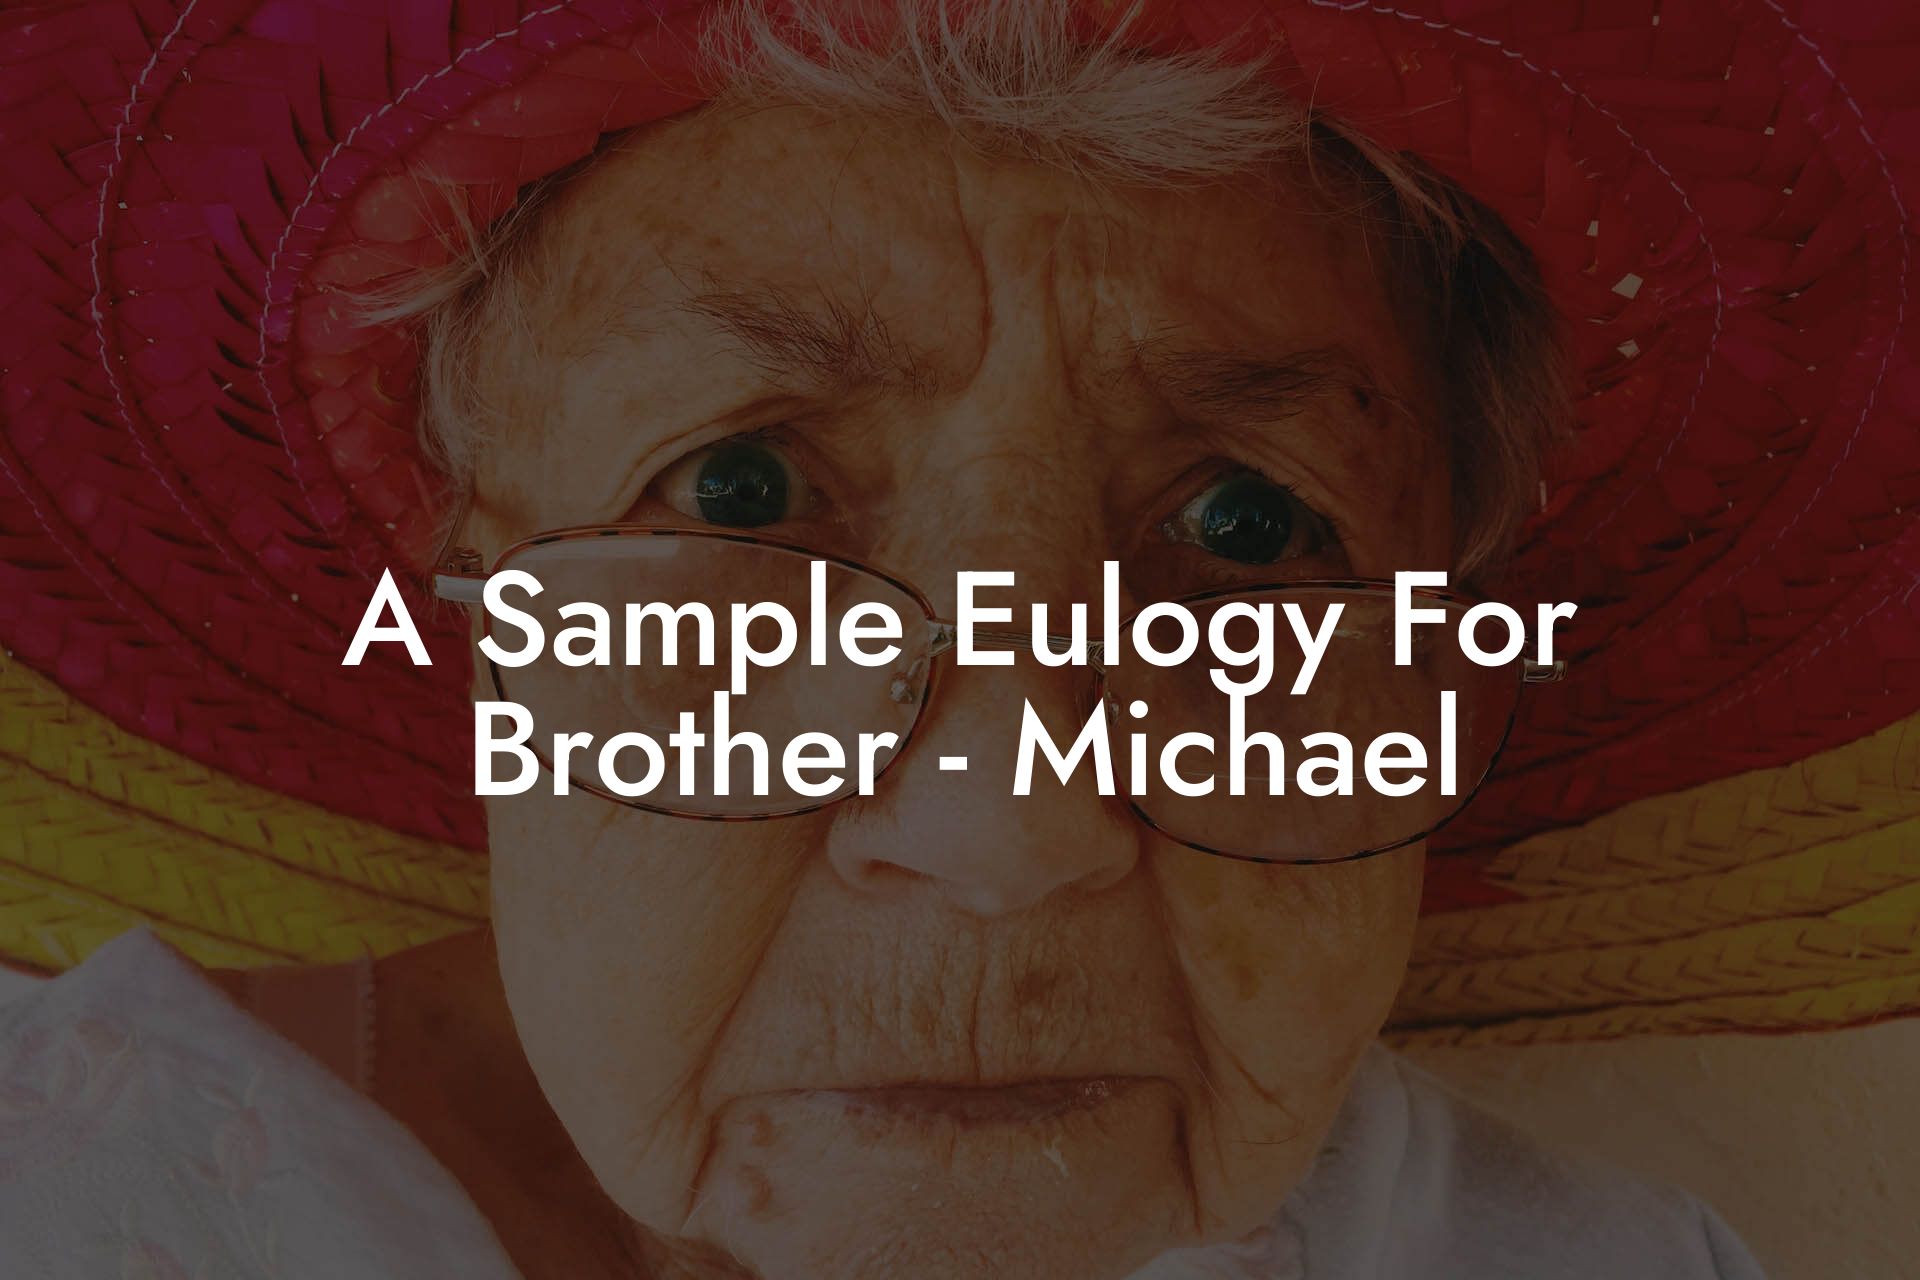 A Sample Eulogy For Brother - Michael